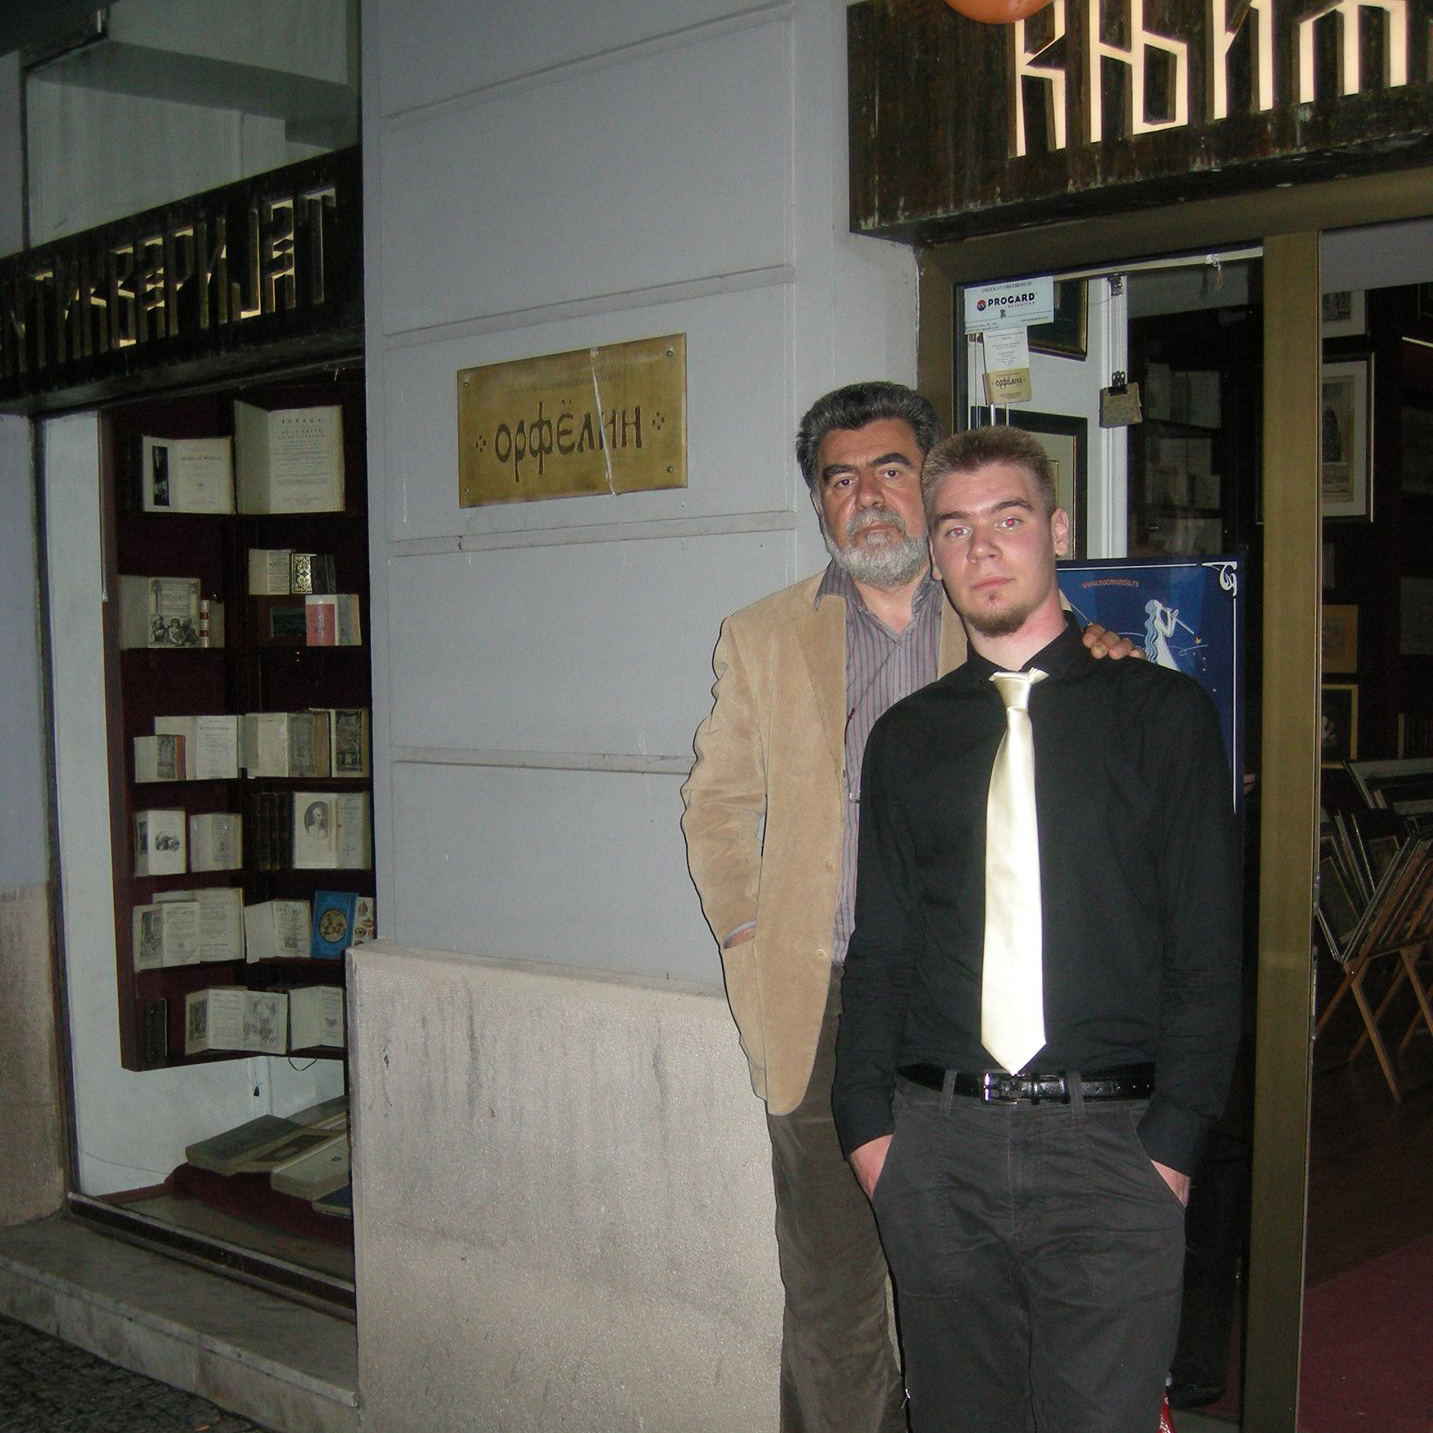 Predrag Milovanovic and his son in front of the antiquariat "Orfelin".